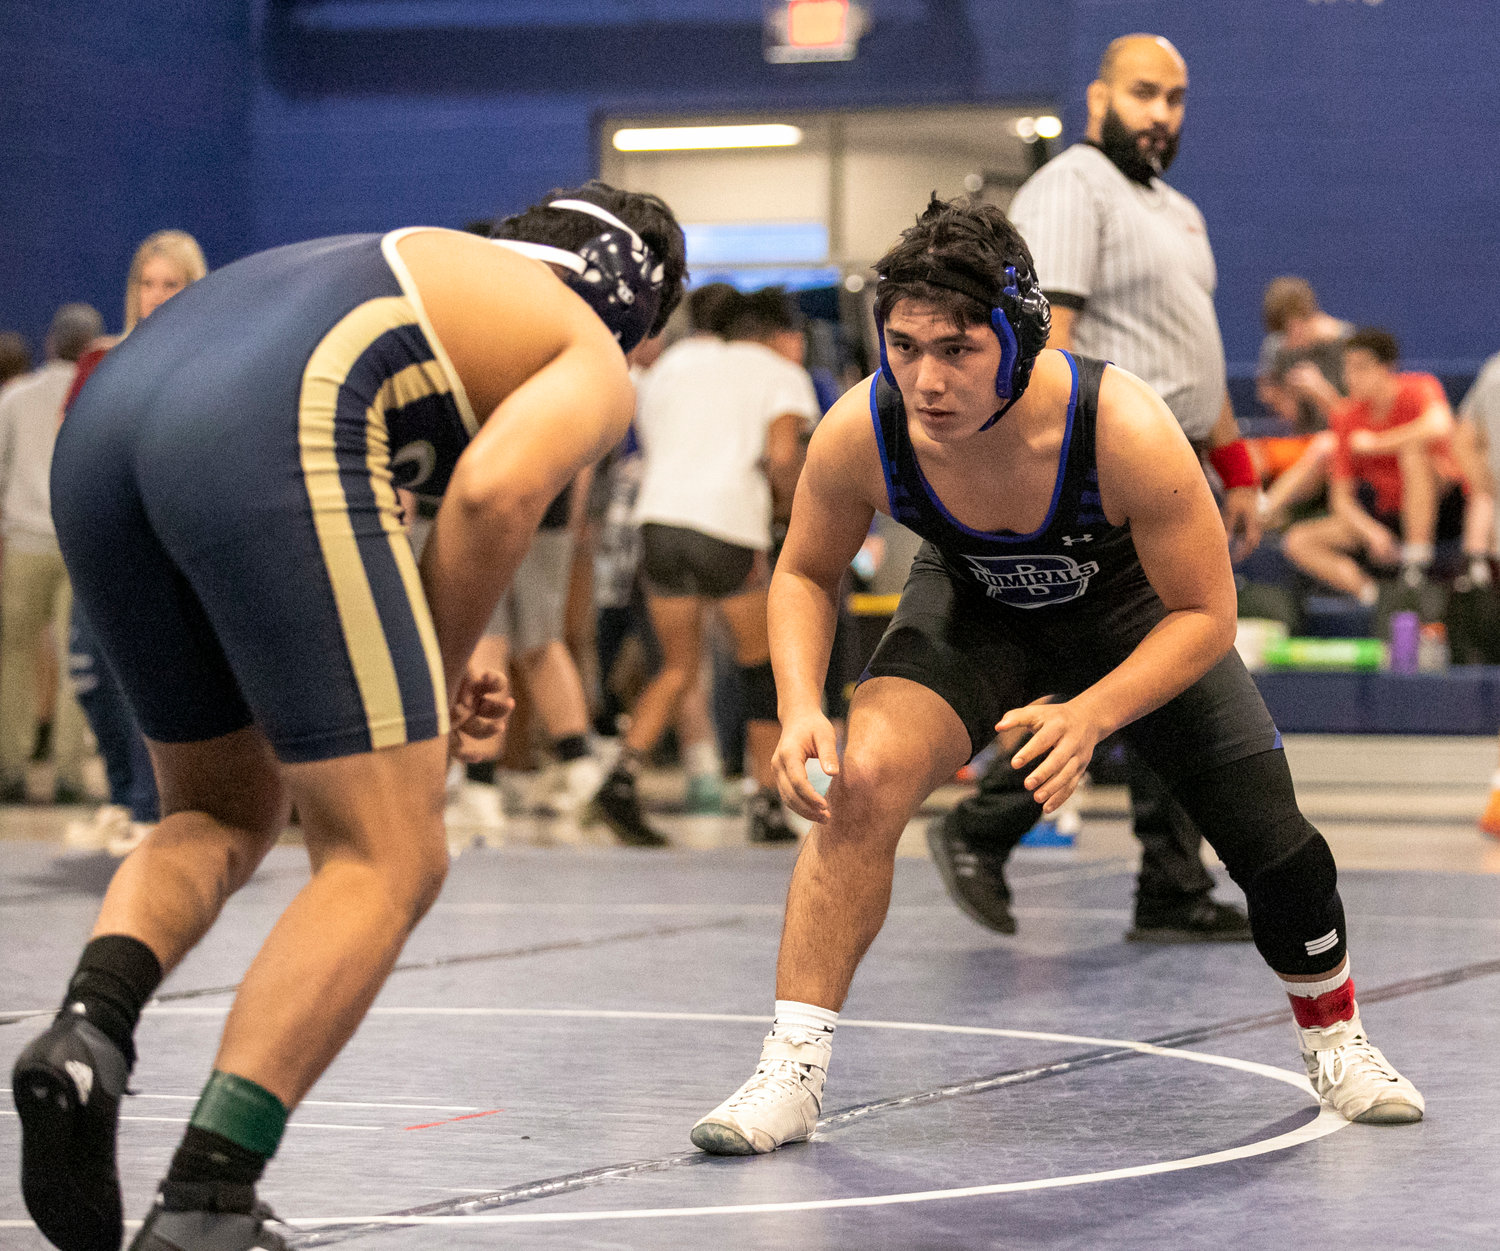 Bayside Academy freshman Brennen Yamane squares up Foley’s Moises Lagos in the quarterfinals of the 182-pound class at Friday’s Baldwin County Championship meet in Gulf Shores. Yamane went on to finish third in the class to earn one of three all-county honors for Admiral wrestlers.